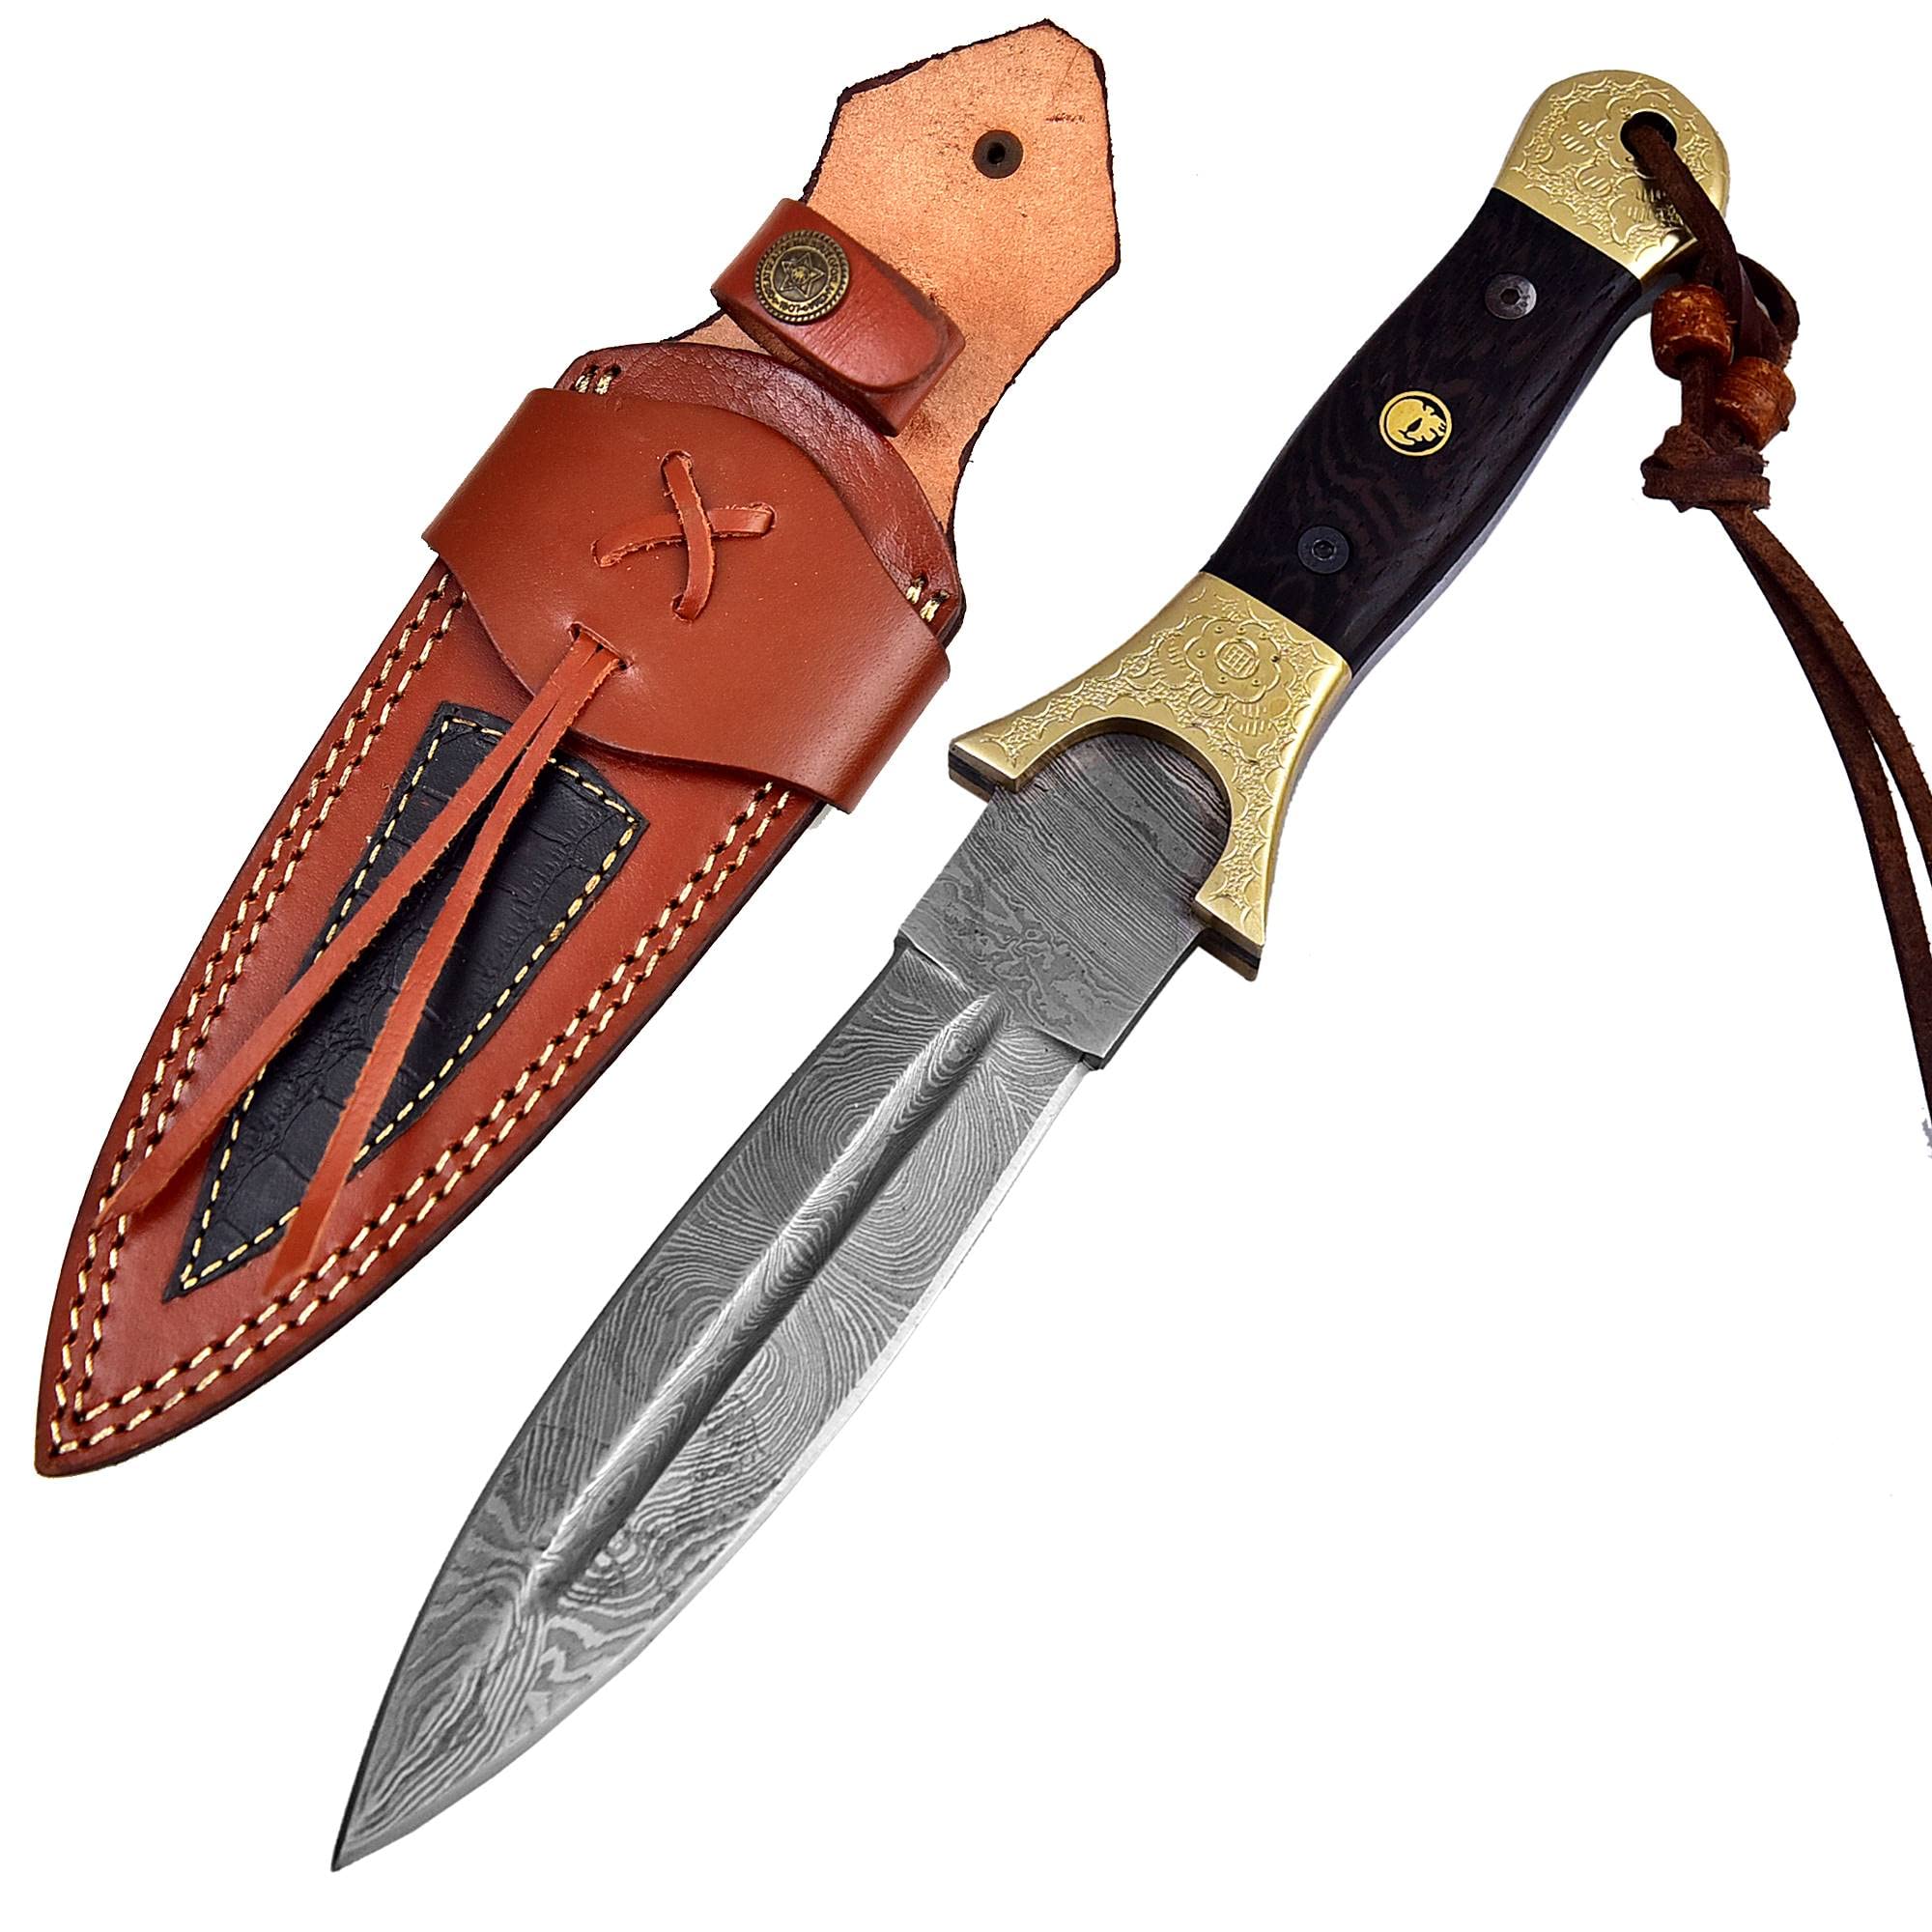 Damascus Steel fixed Blade Hunting Knife with Leather Sheath - Camping/Survival/Tactical/Handmade